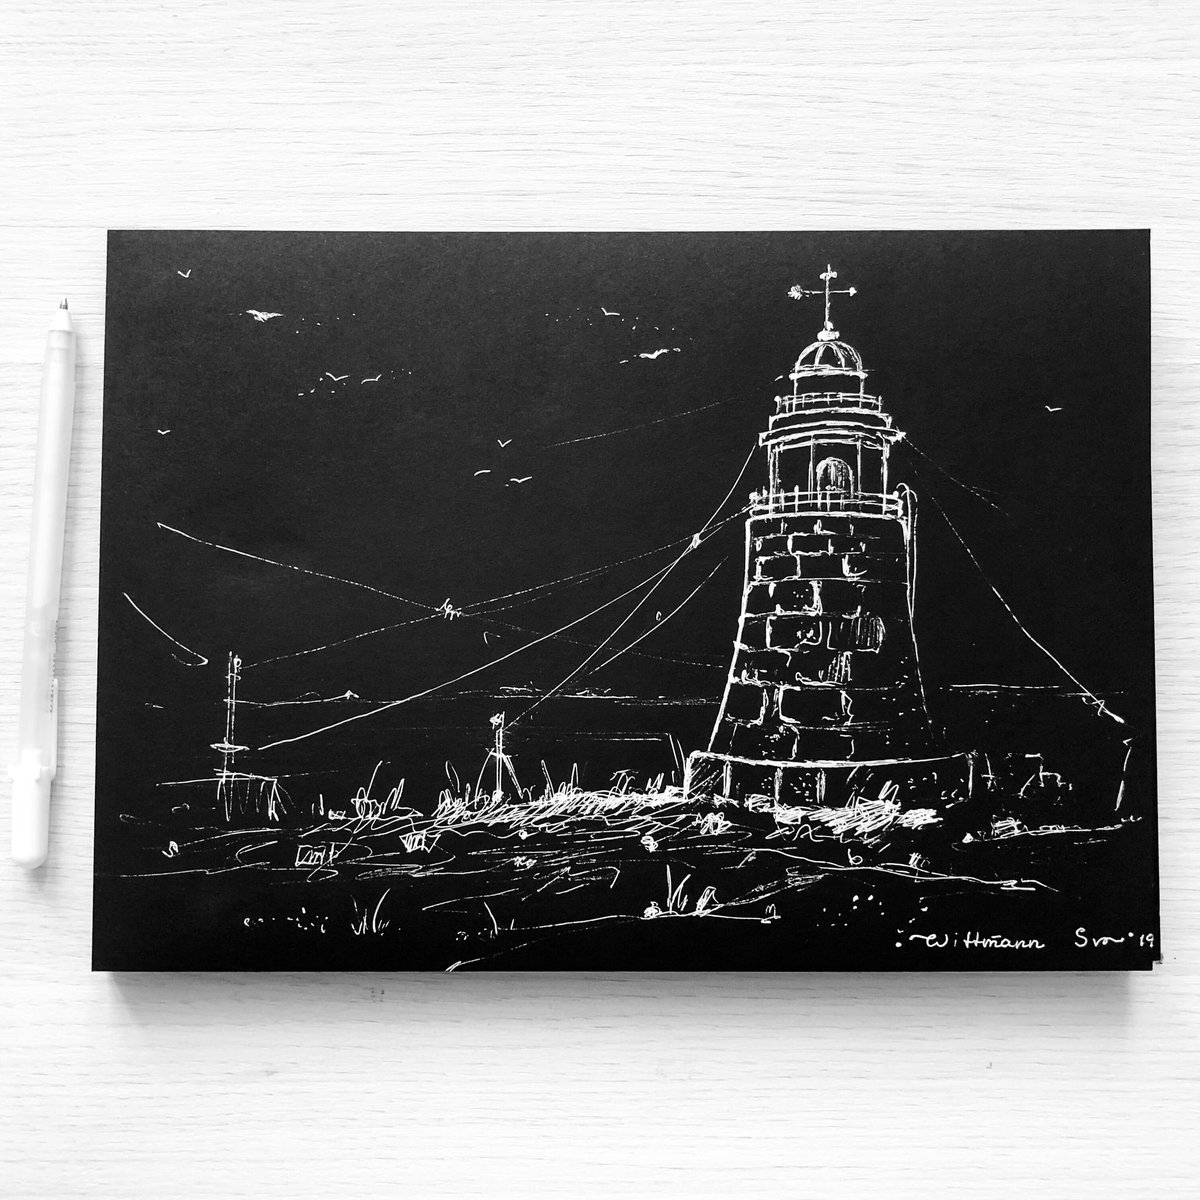 🖤Black&white🖤
Lighthouse drawing on the black paper by #fabrianopaper 👏
For #маякомарафон 2.
🎶Speed paint (here) and full video process at my art channel (link in bio) coming soon 😁
.
#sketching #sketches #lighthouse #lighthousedrawing #blackpaperart #blackpaper